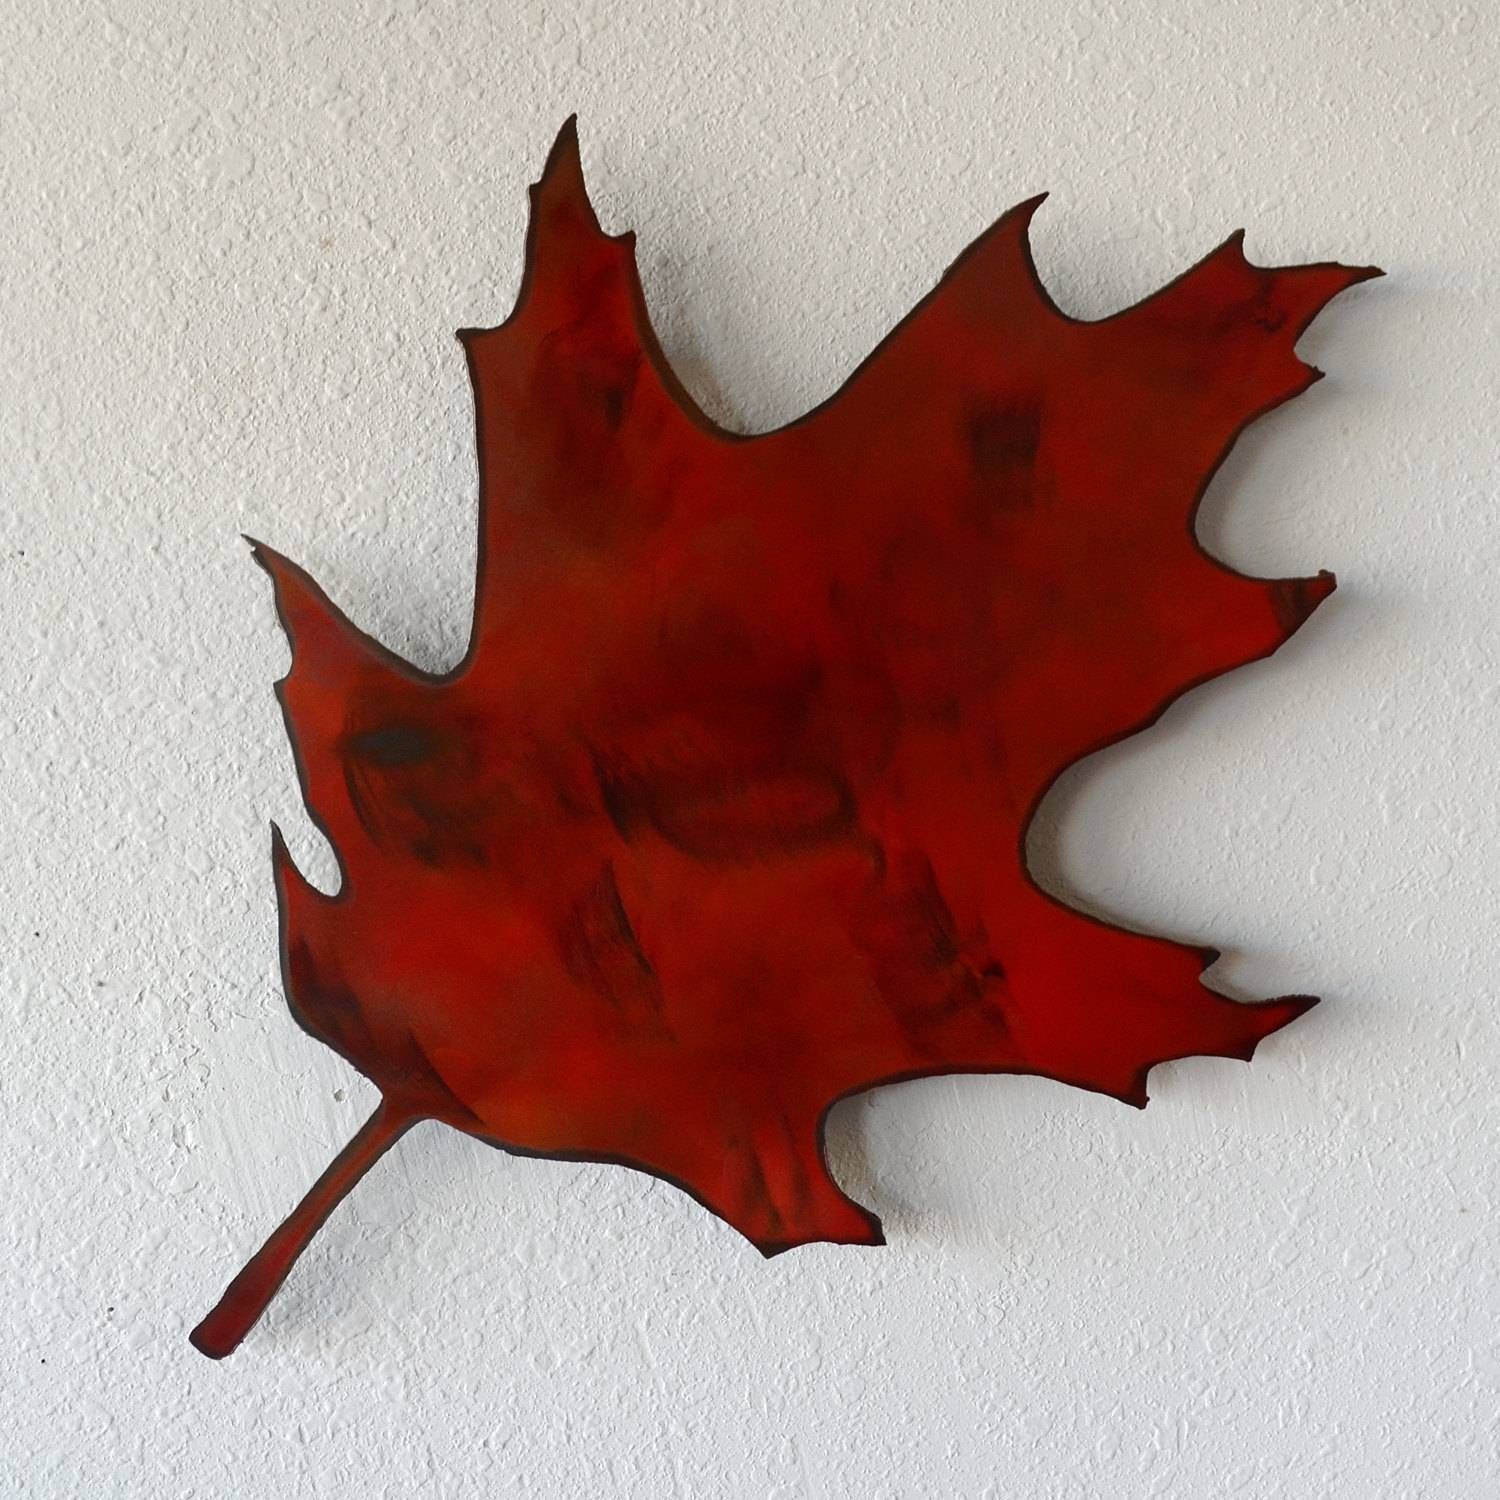 Metal Maple Leaf Wall Hanging Maple Leaf Maple Leaf Note With Recent Oak Tree Metal Wall Art (Gallery 23 of 30)